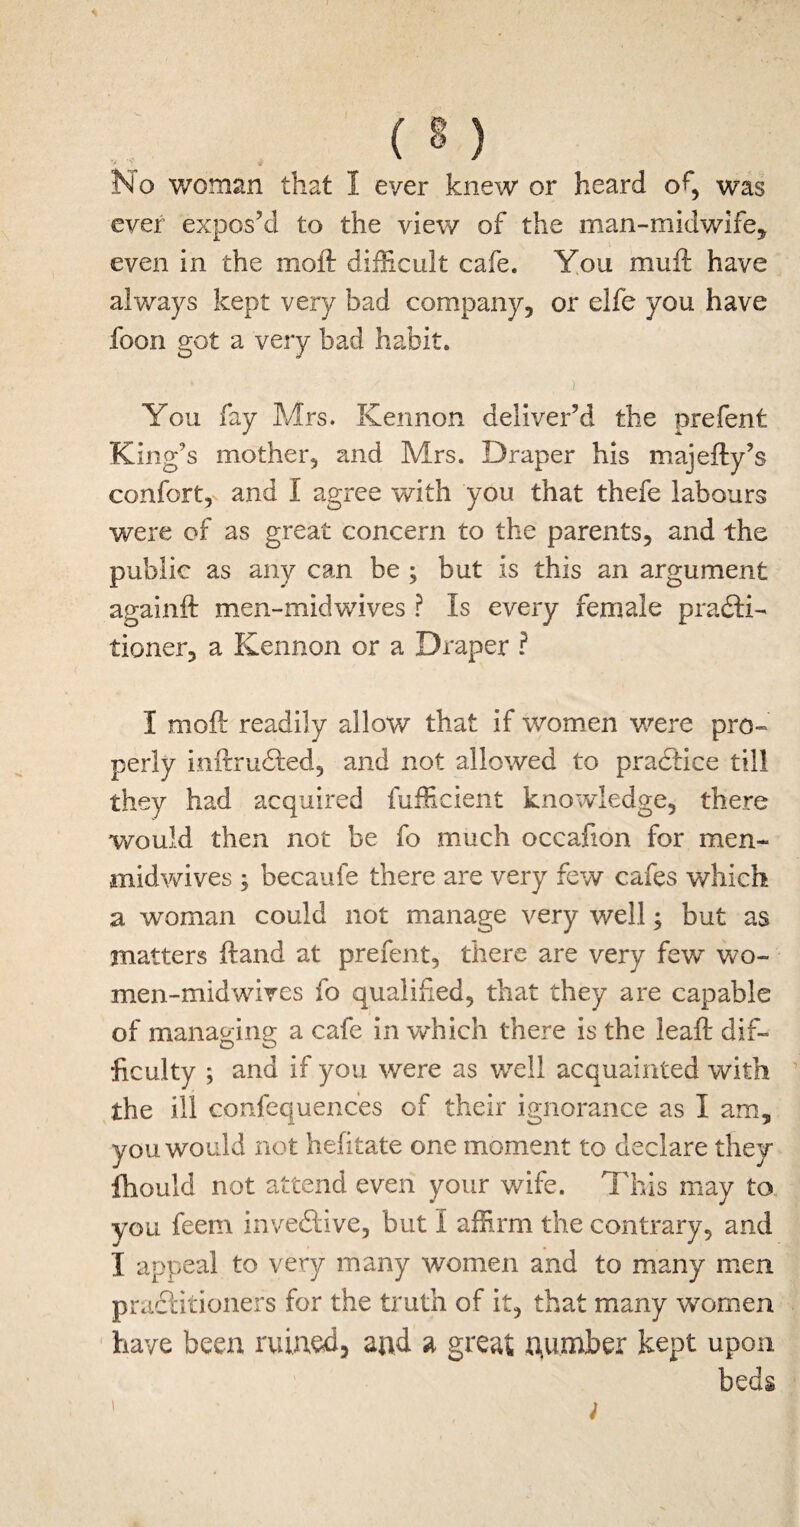 No woman that 1 ever knew or heard of, was ever expos’d to the view of the man-midwife* even in the moft difficult cafe. You mult have always kept very bad company* or elfe you have foon got a very bad habit. You fay Mrs. Kennon deliver’d the prefent King’s mother, and Mrs. Draper his majefty’s confort, and 1 agree with you that thefe labours were of as great concern to the parents, and the public as any can be ; but is this an argument againft men-midwives ? Is every female practi¬ tioner, a Kennon or a Draper ? I moft readily allow that if women were pro¬ perly ioftruCted, and not allowed to practice till they had acquired fufficient knowledge, there would then not be fo much occafion for men- midwives ; becaule there are very few cafes which a woman could not manage very well; but as matters ftand at prefent, there are very few wo- men-midwives fo qualified, that they are capable of managing a cafe in which there is the leaft dif- ficulty ; and if you were as well acquainted with the ill confequenc'es of their ignorance as I am, you would not hefitate one moment to declare they fhould not attend even your wife. This may to you feem inveCtive, but I affirm the contrary, and I appeal to very many women and to many men practitioners for the truth of it, that many women have been ruined, and a great number kept upon beds